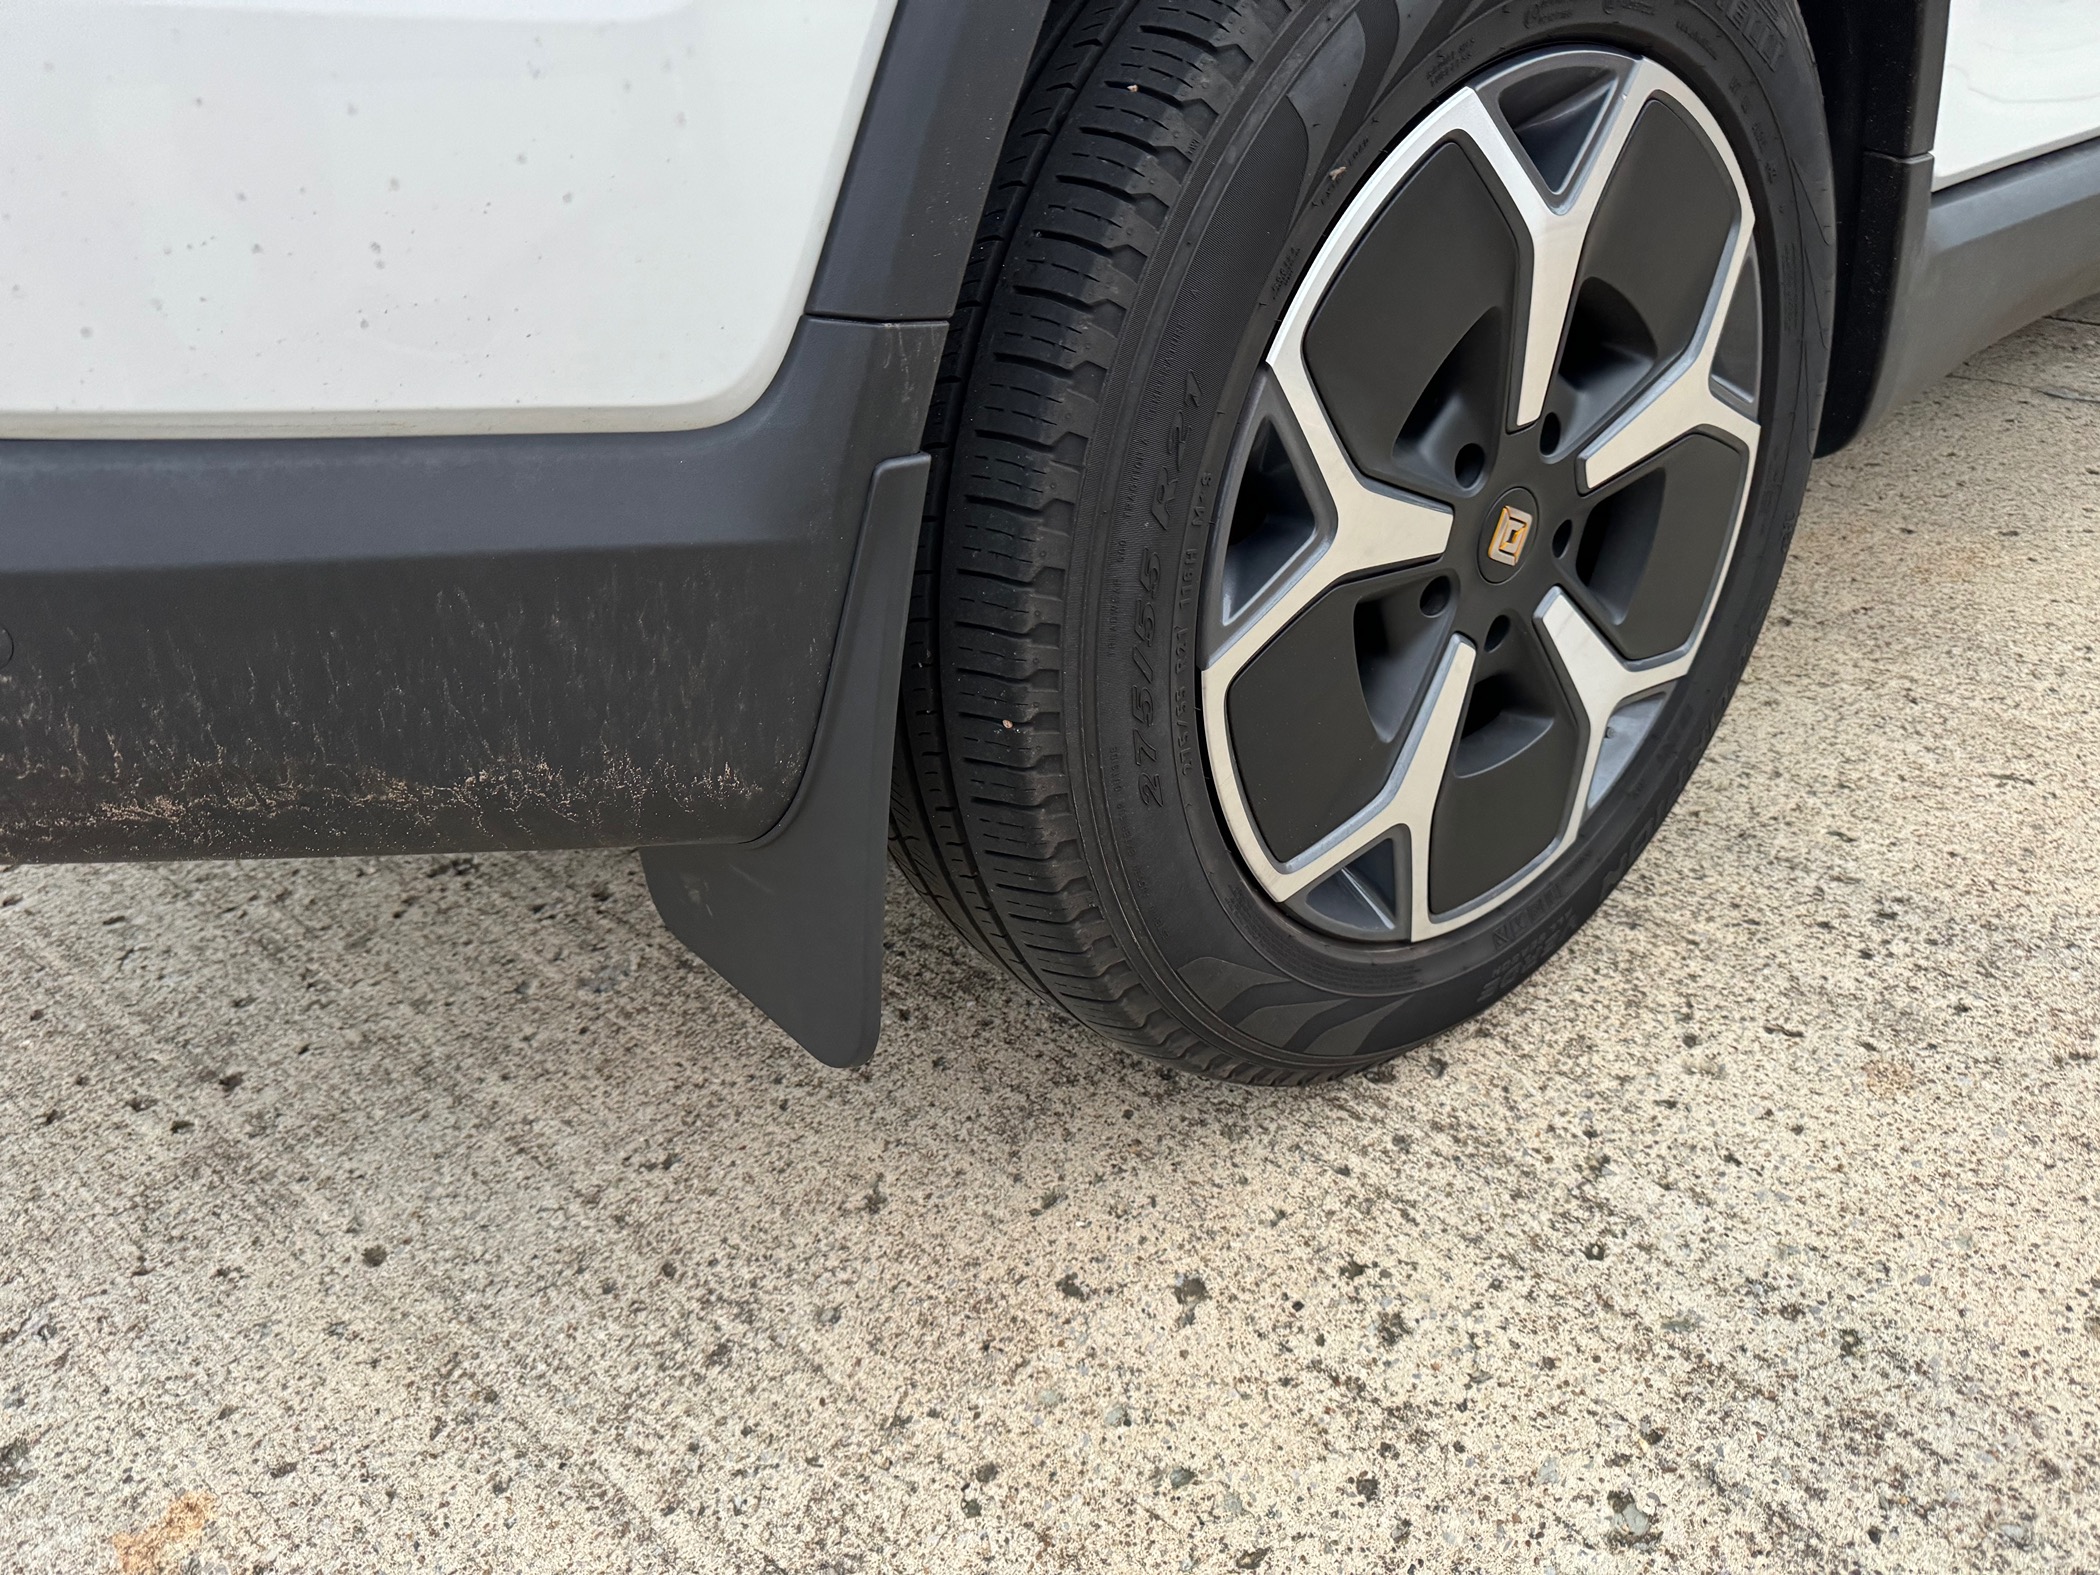 Rivian R1T R1S BestEvMod Mud Flaps for R1T Available Now IMG_3397